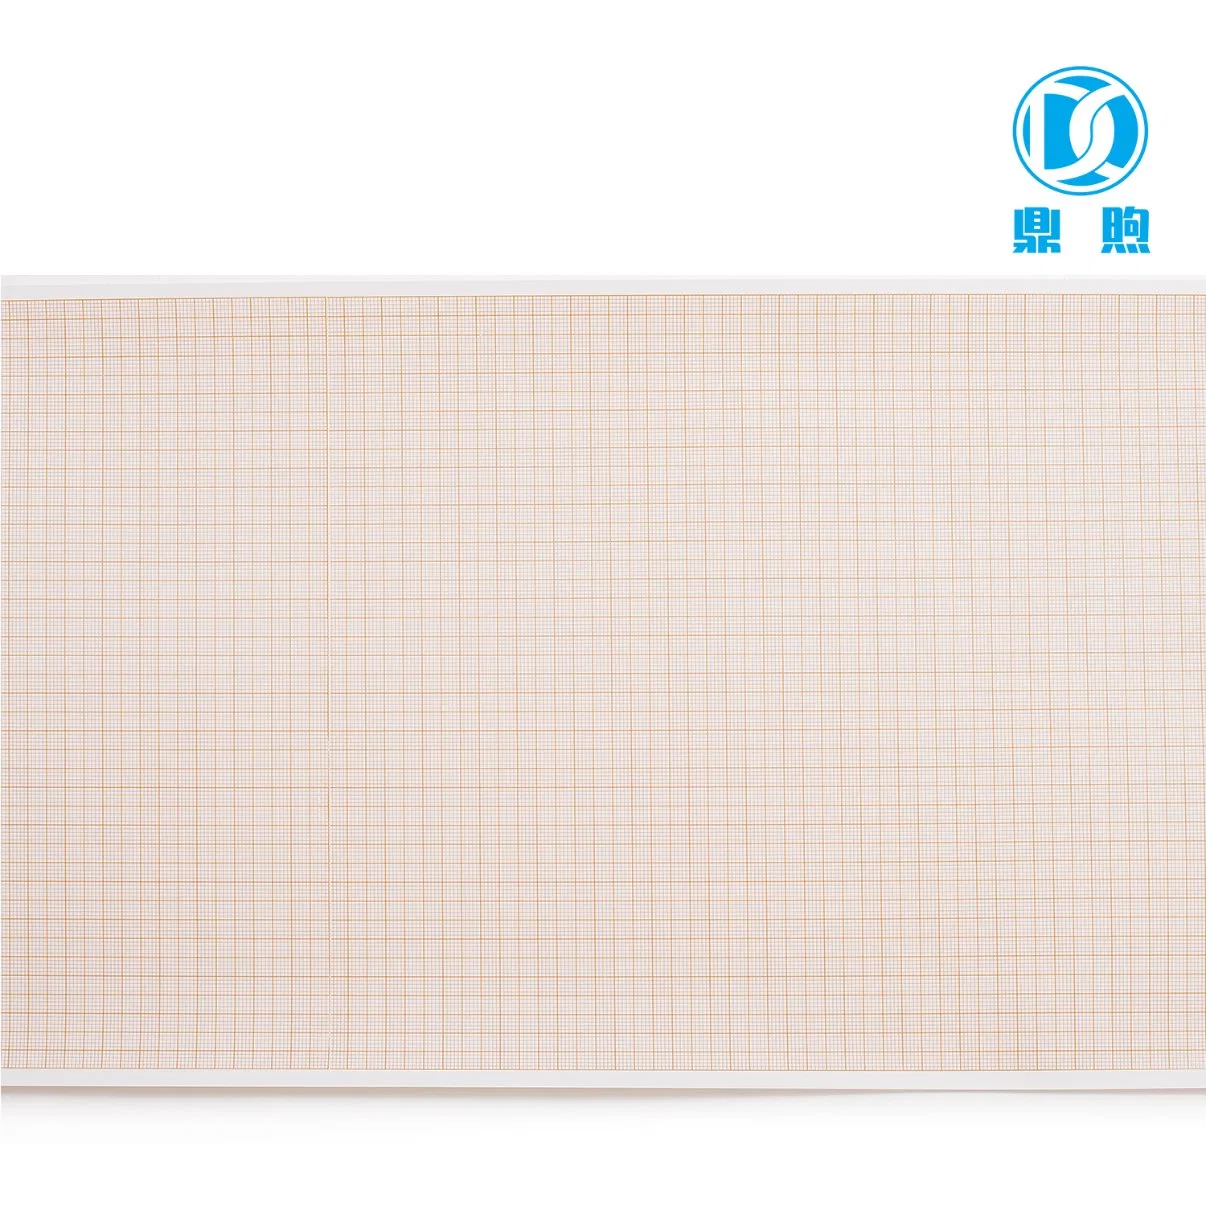 210mm*30m Thermal ECG Paper Roll Hospital Medical Recording Paper with CE